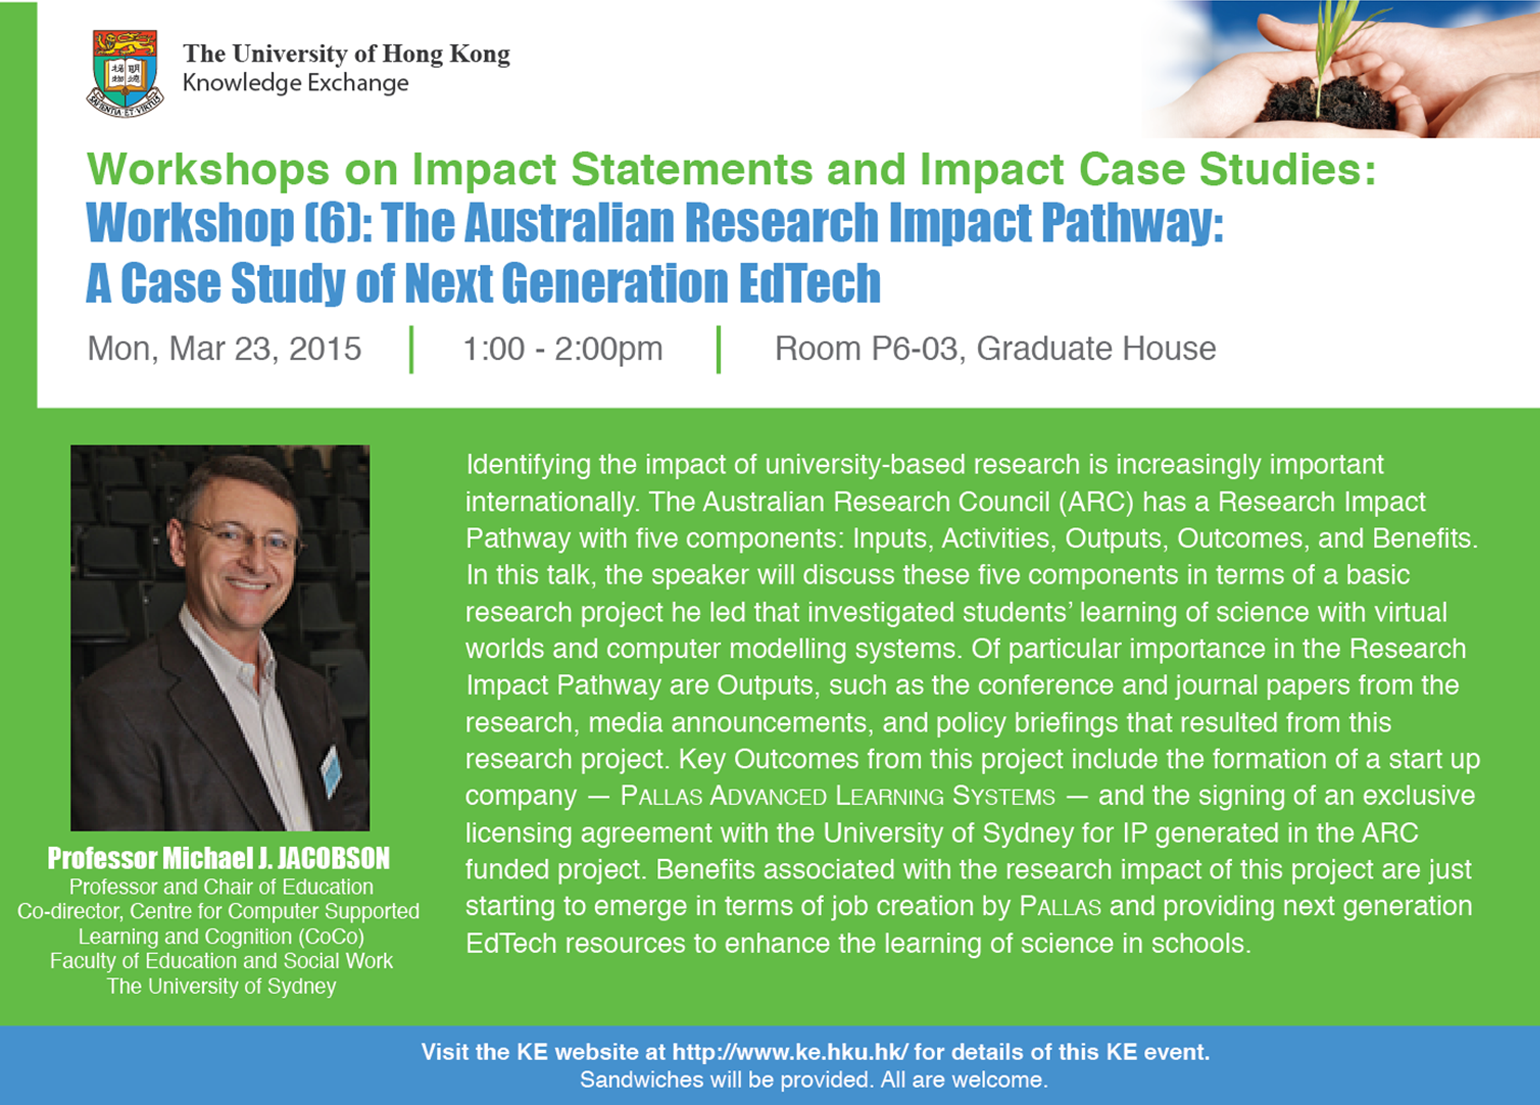 The Australian Research Impact Pathway: A Case Study of Next Generation EdTech